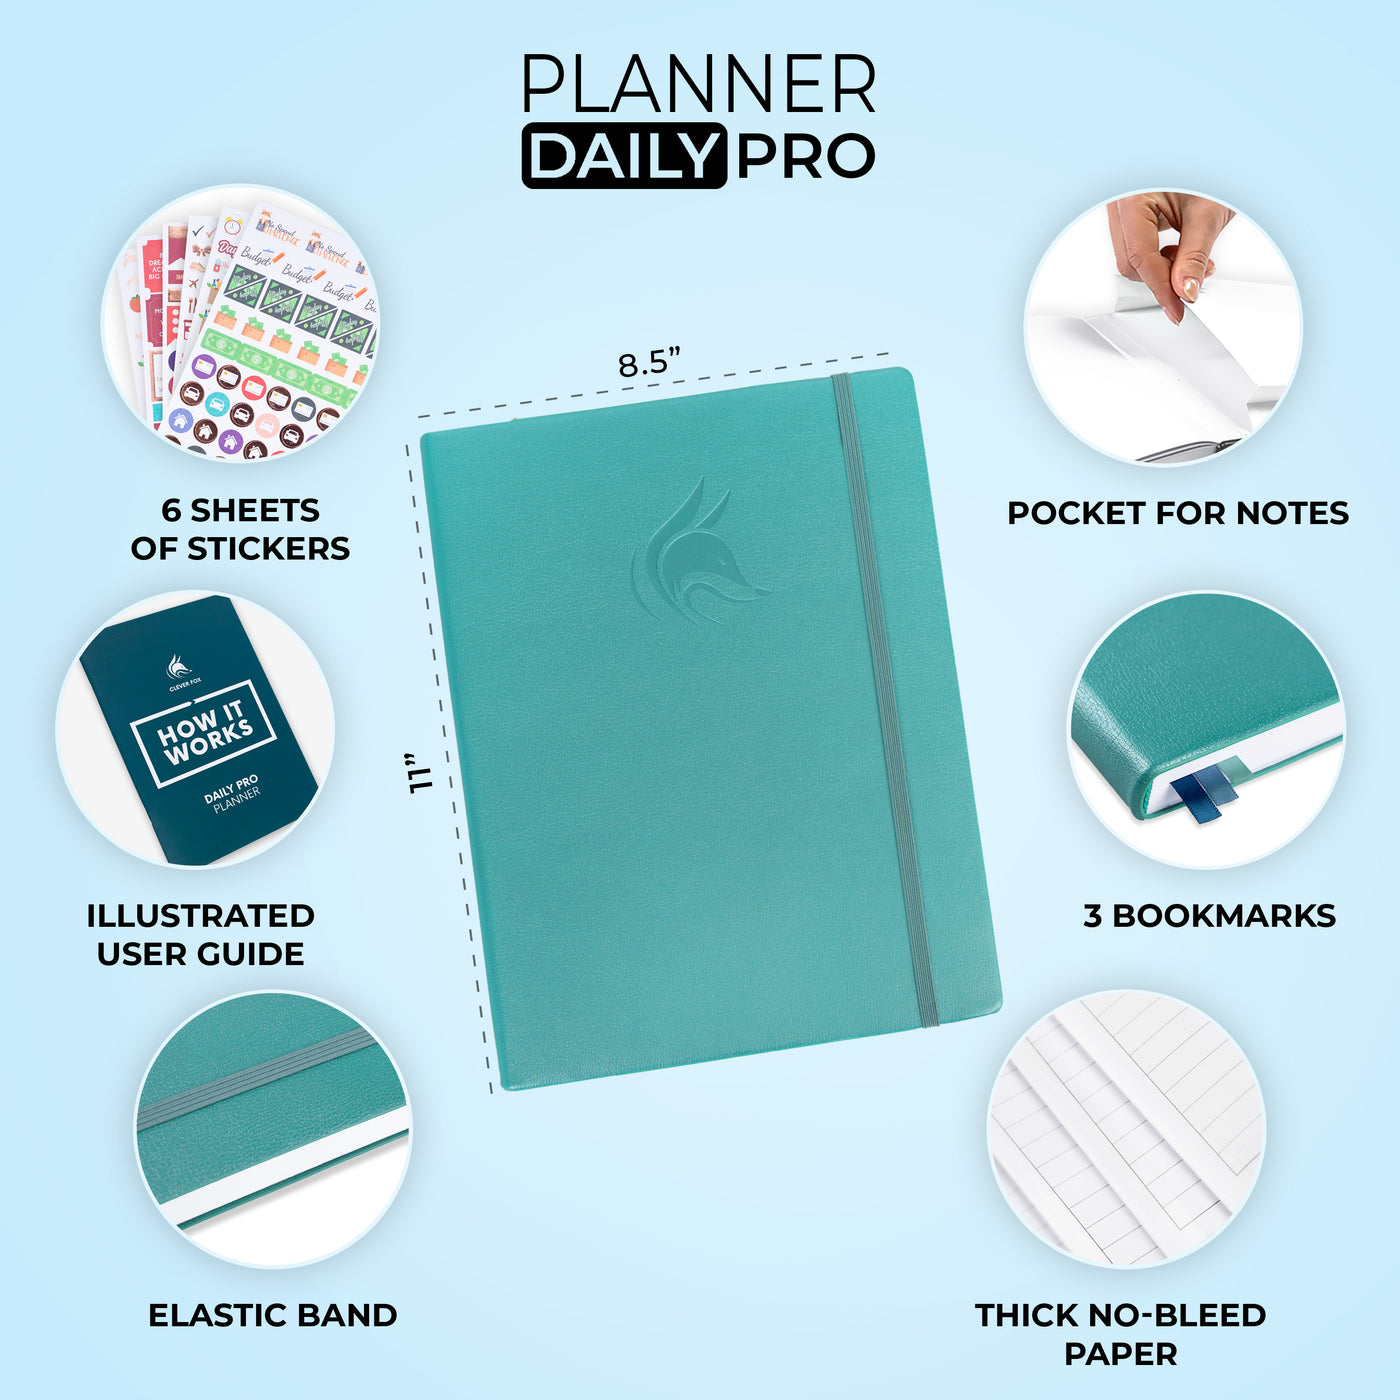 Clever Fox Planner Daily – Undated Agenda & Daily Calendar to Boost  Productivity & Hit Your Goals – Gratitude Journal Personal Daily Organizer  –